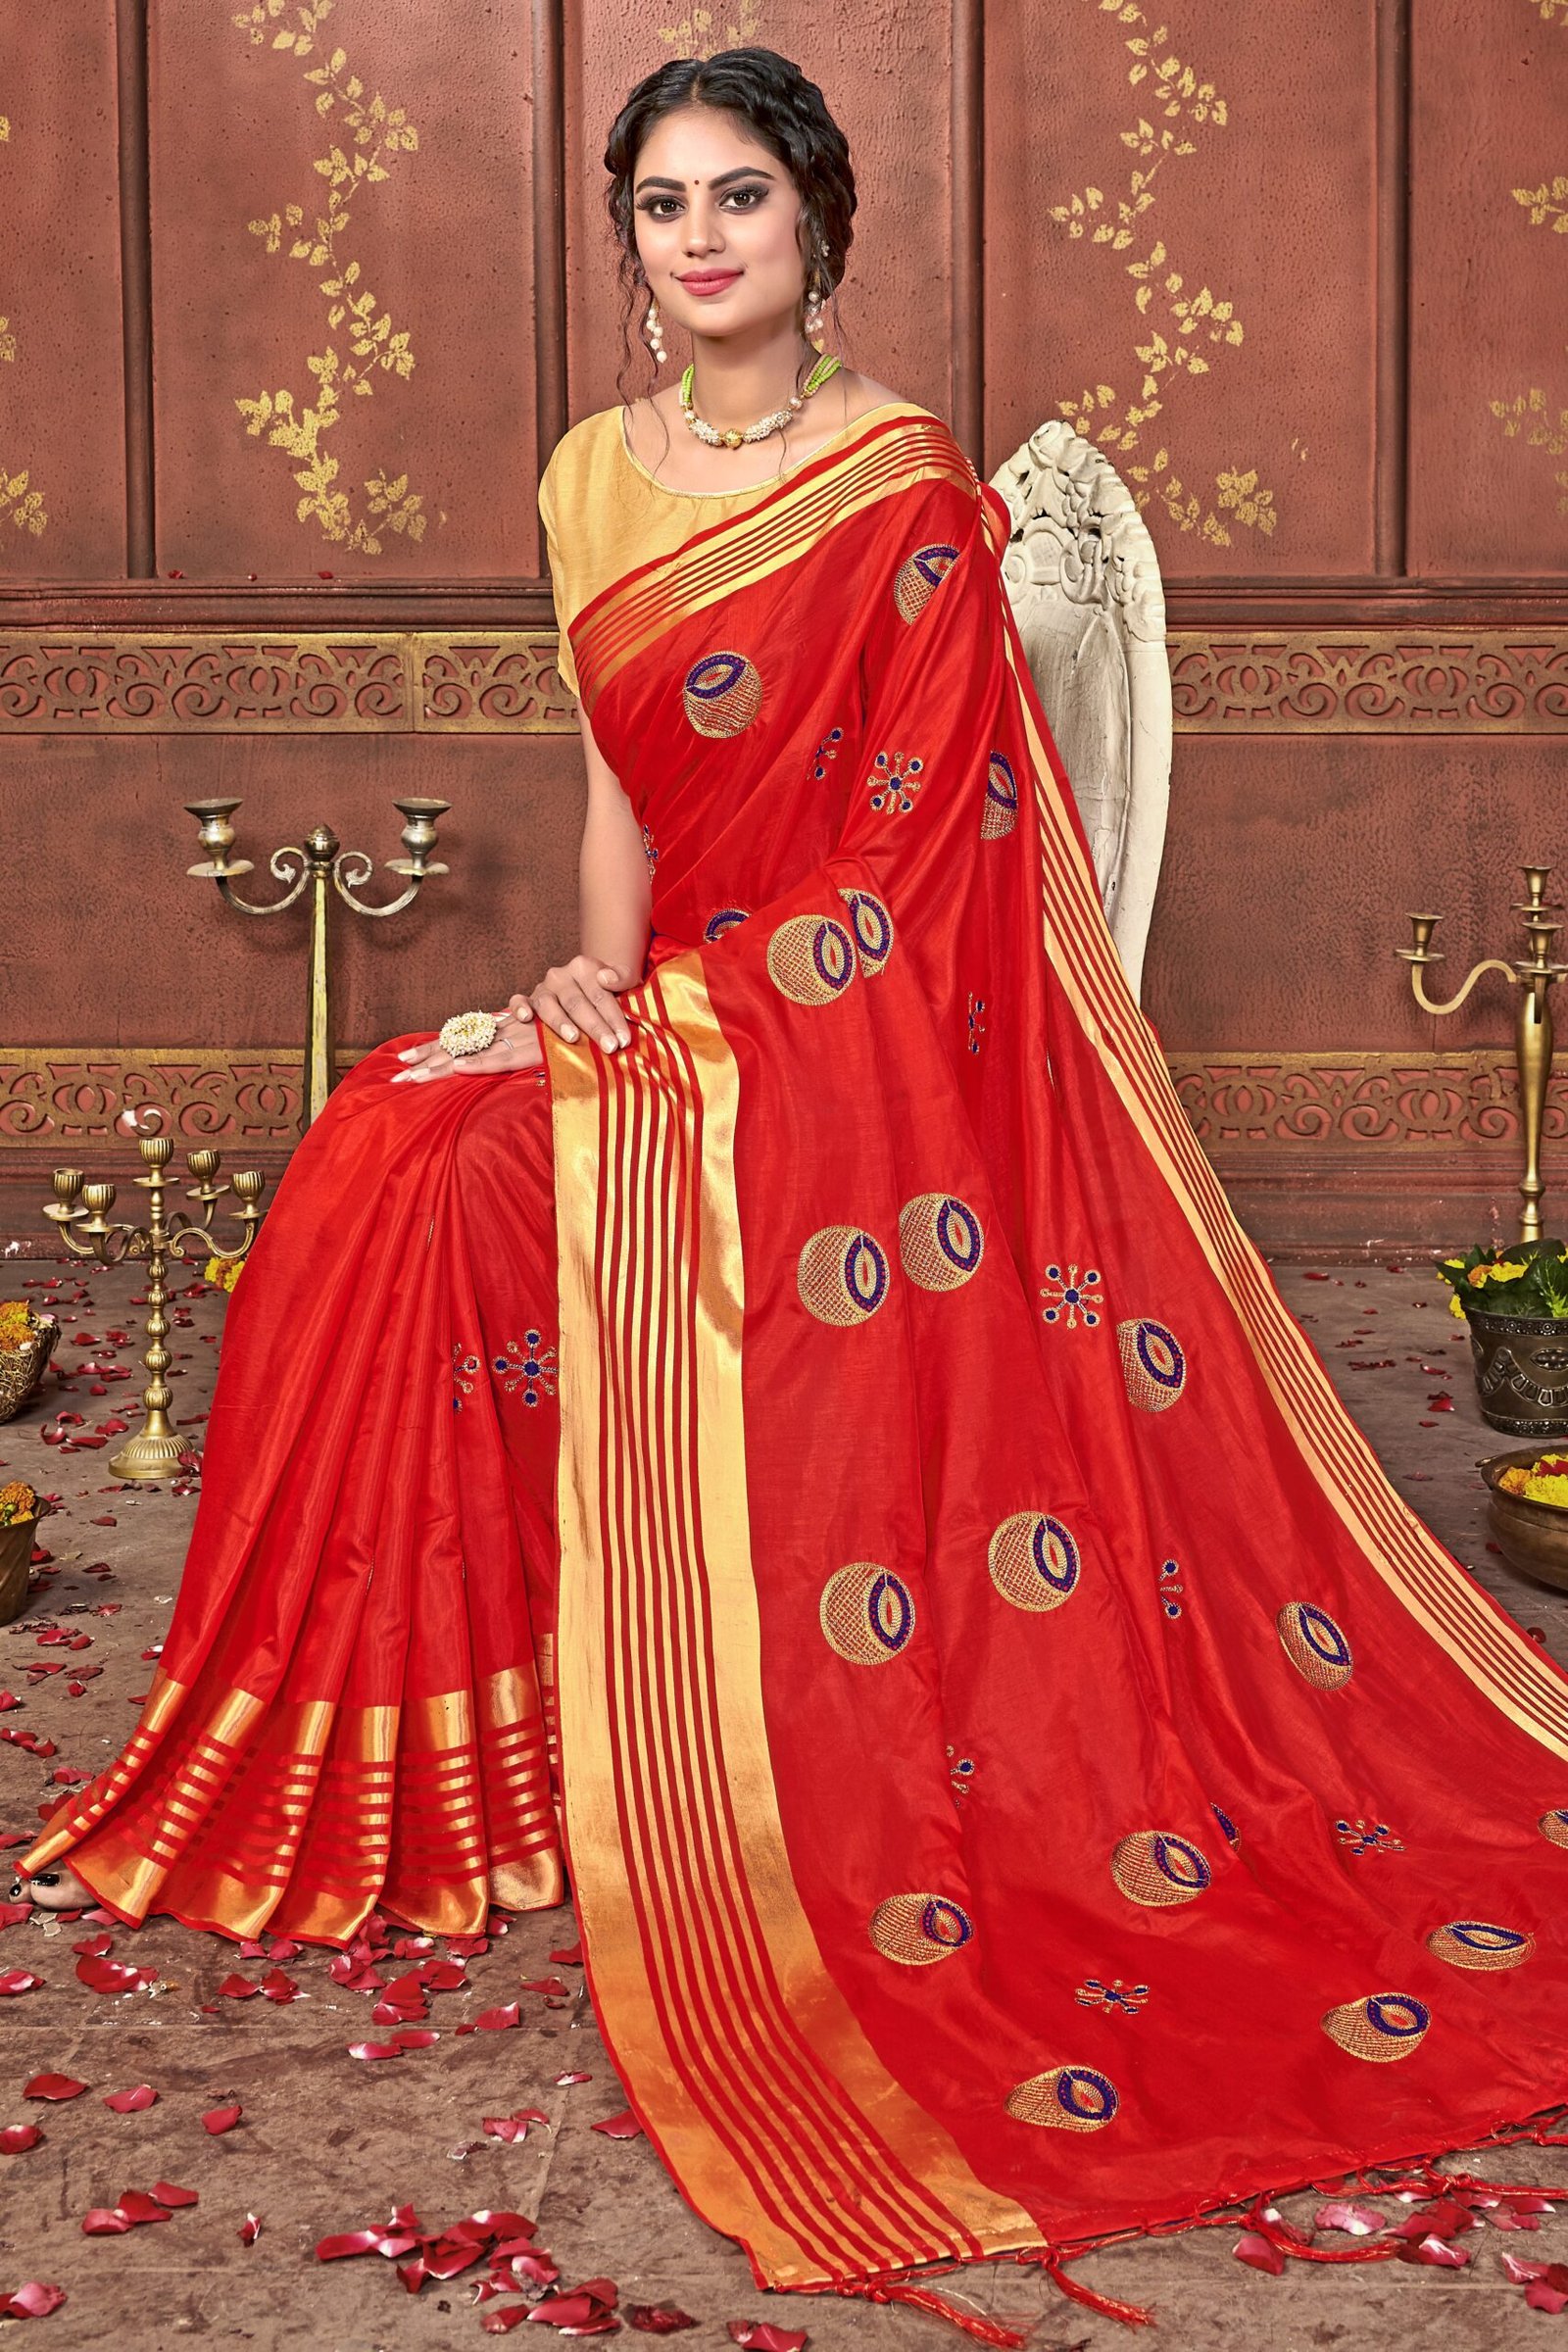 Buy Manorath Women's Collections Saree Festival Offer Hot New Releases  Great Indian Festival Latest Design Sarees New Collection 2022 Sarees below  1000 Rupees 500 Rupees Sarees for Women Partywear Latest Design Wedding